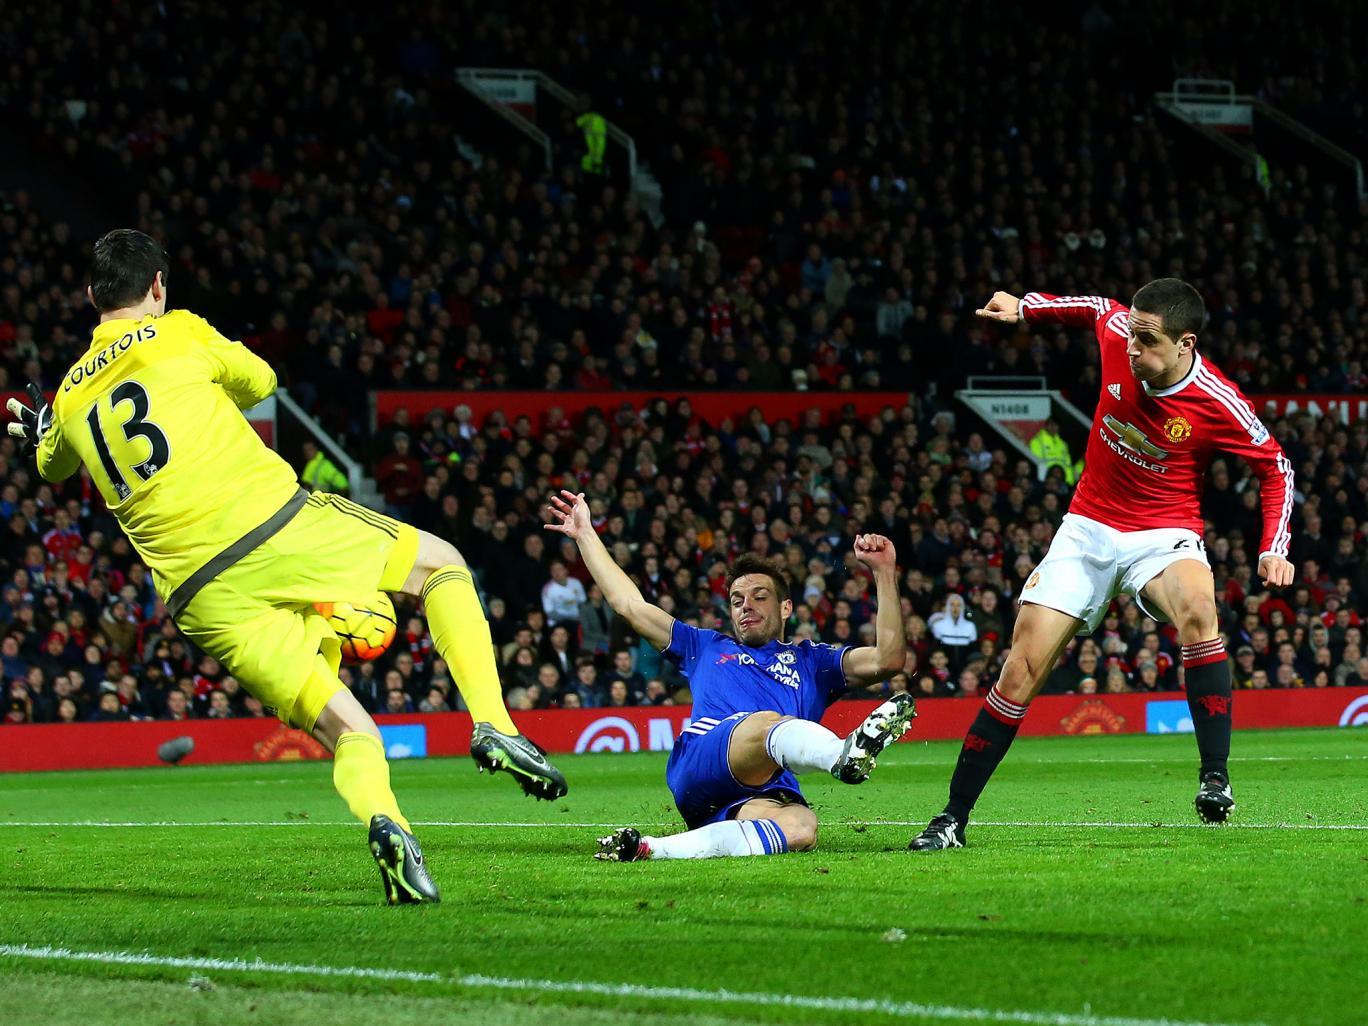 Soccer Review: Manchester United vs Chelsea - Movie TV Tech Geeks News